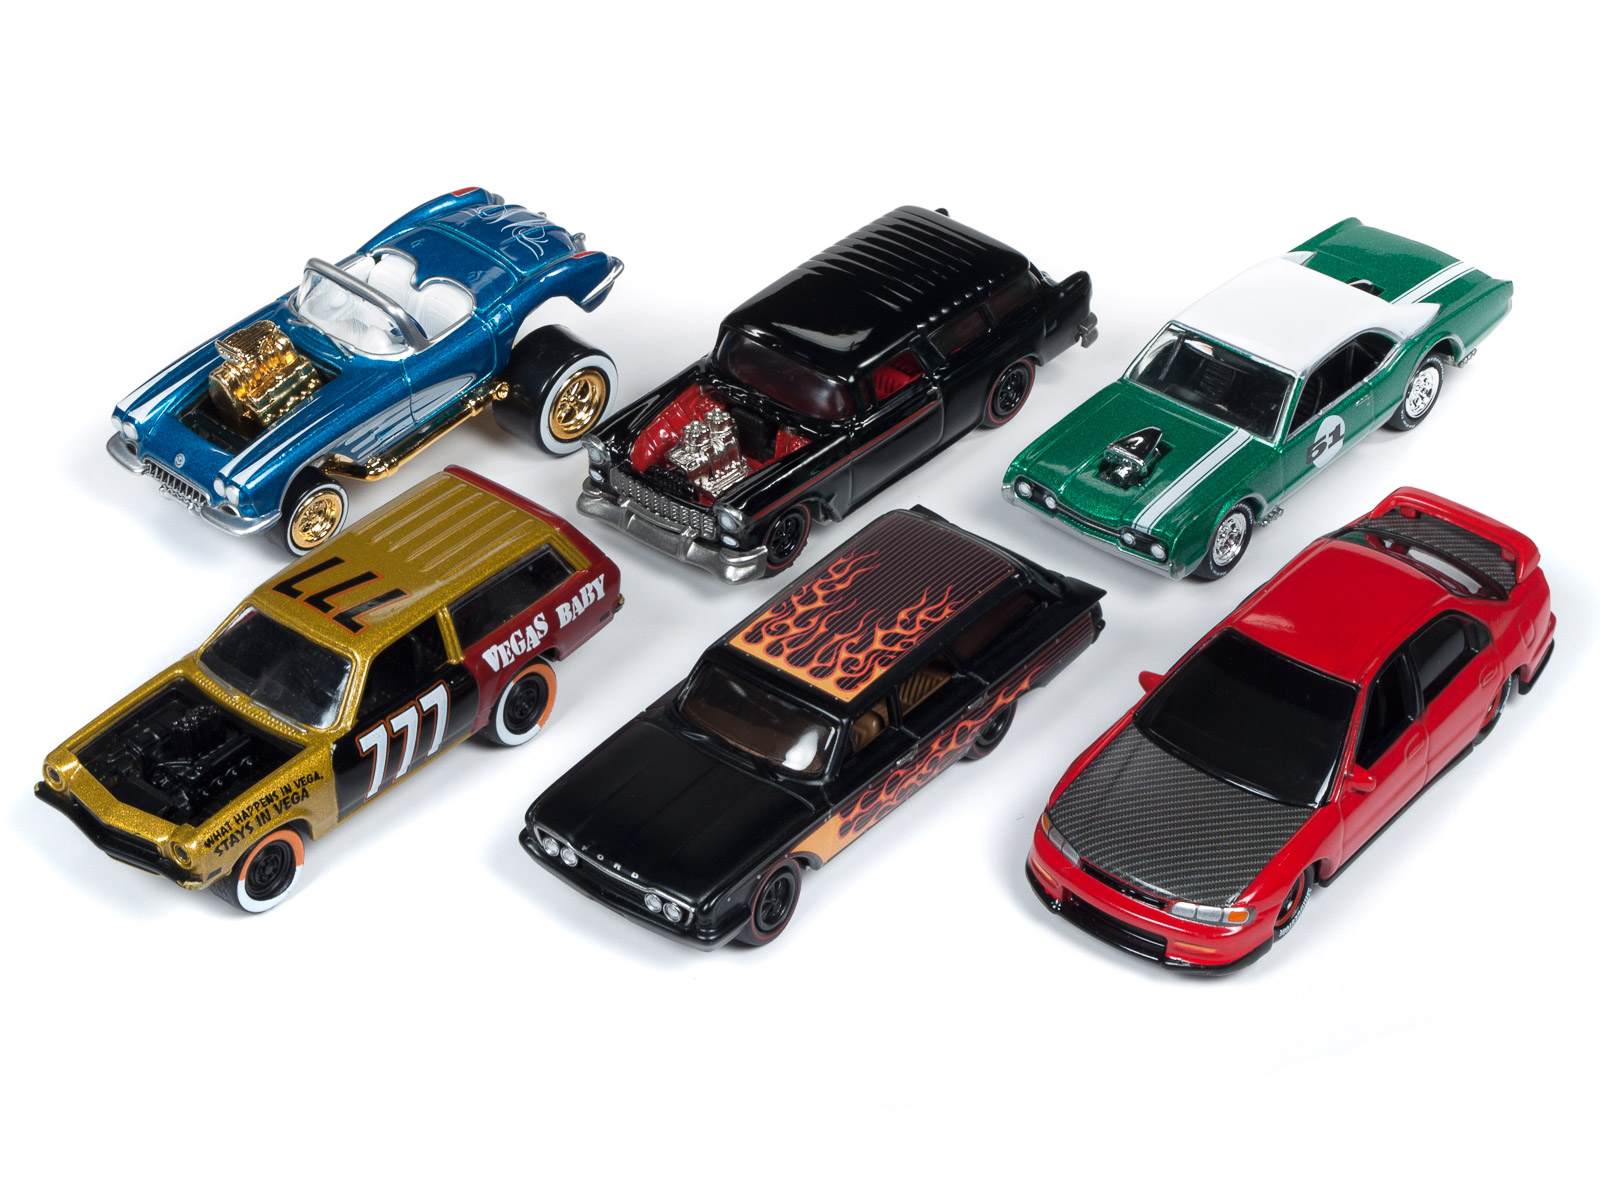 "Street Freaks" 2019 Release 2 Set B of 6 Cars Limited Edition to 3000 pieces Worldwide 1/64 Diecast Models by Johnny Lightning